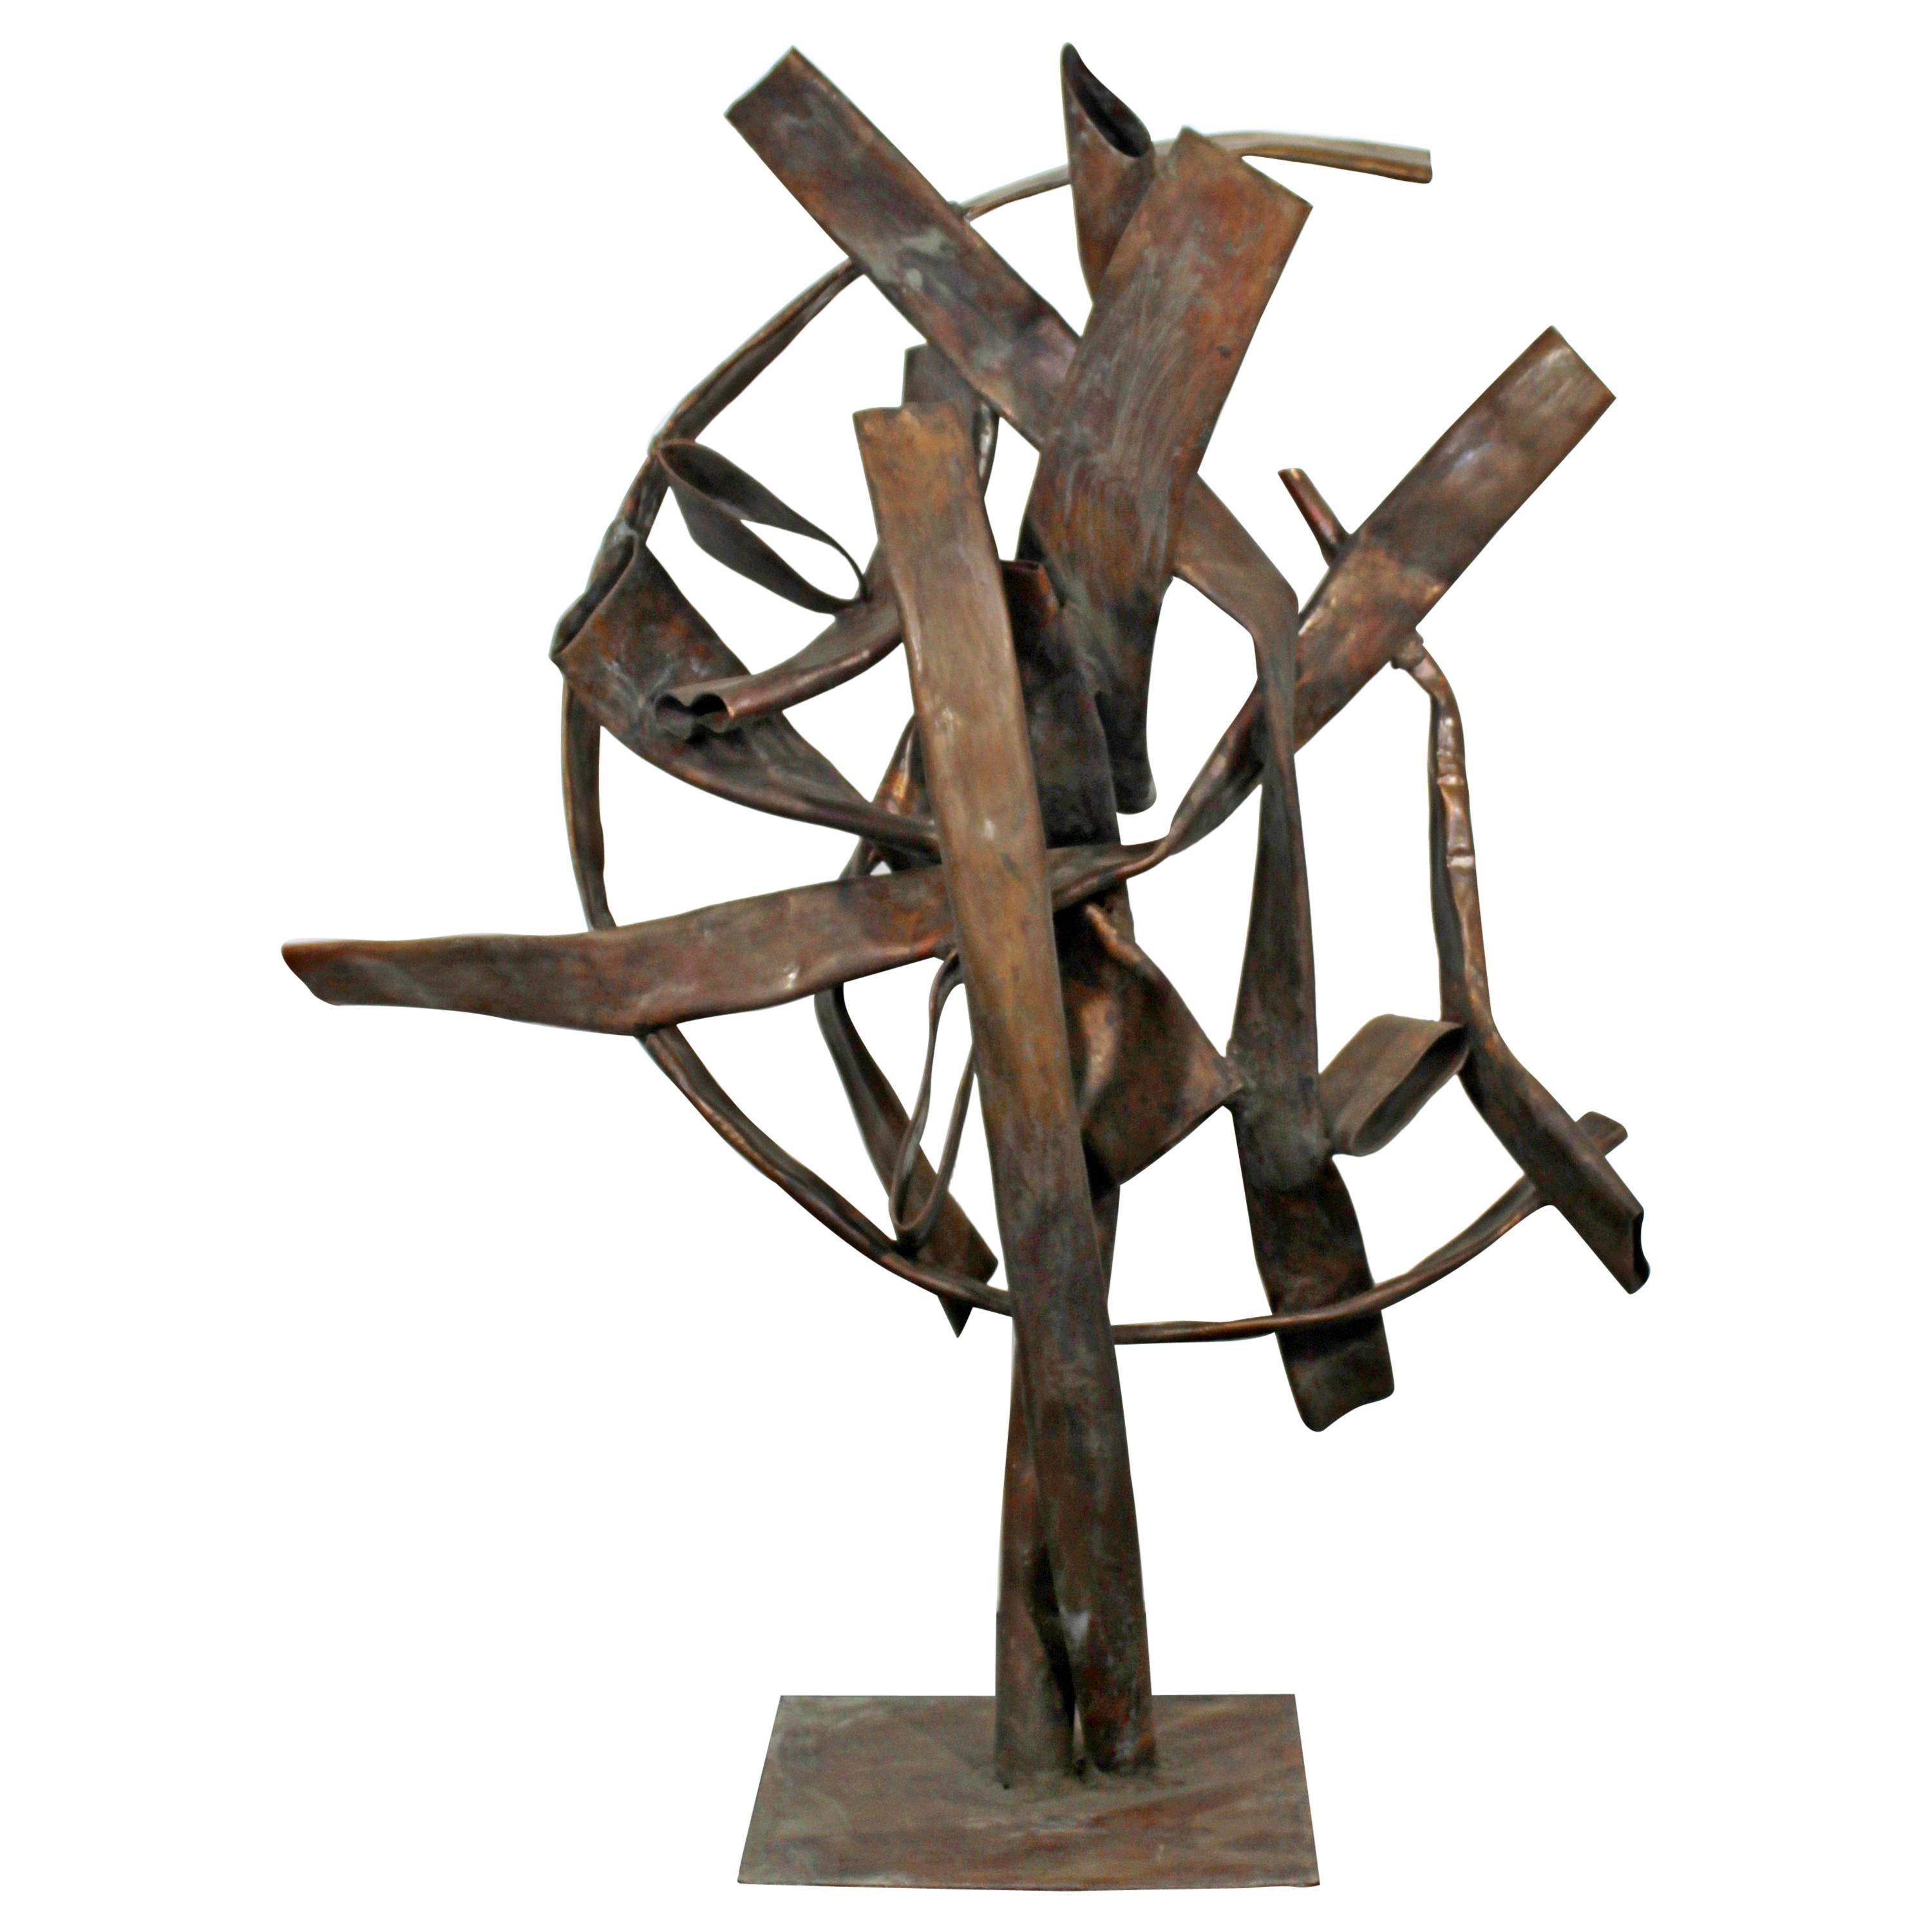 Contemporary Forged Copper Abstract Table Sculpture Signed Robert Hansen, 2016